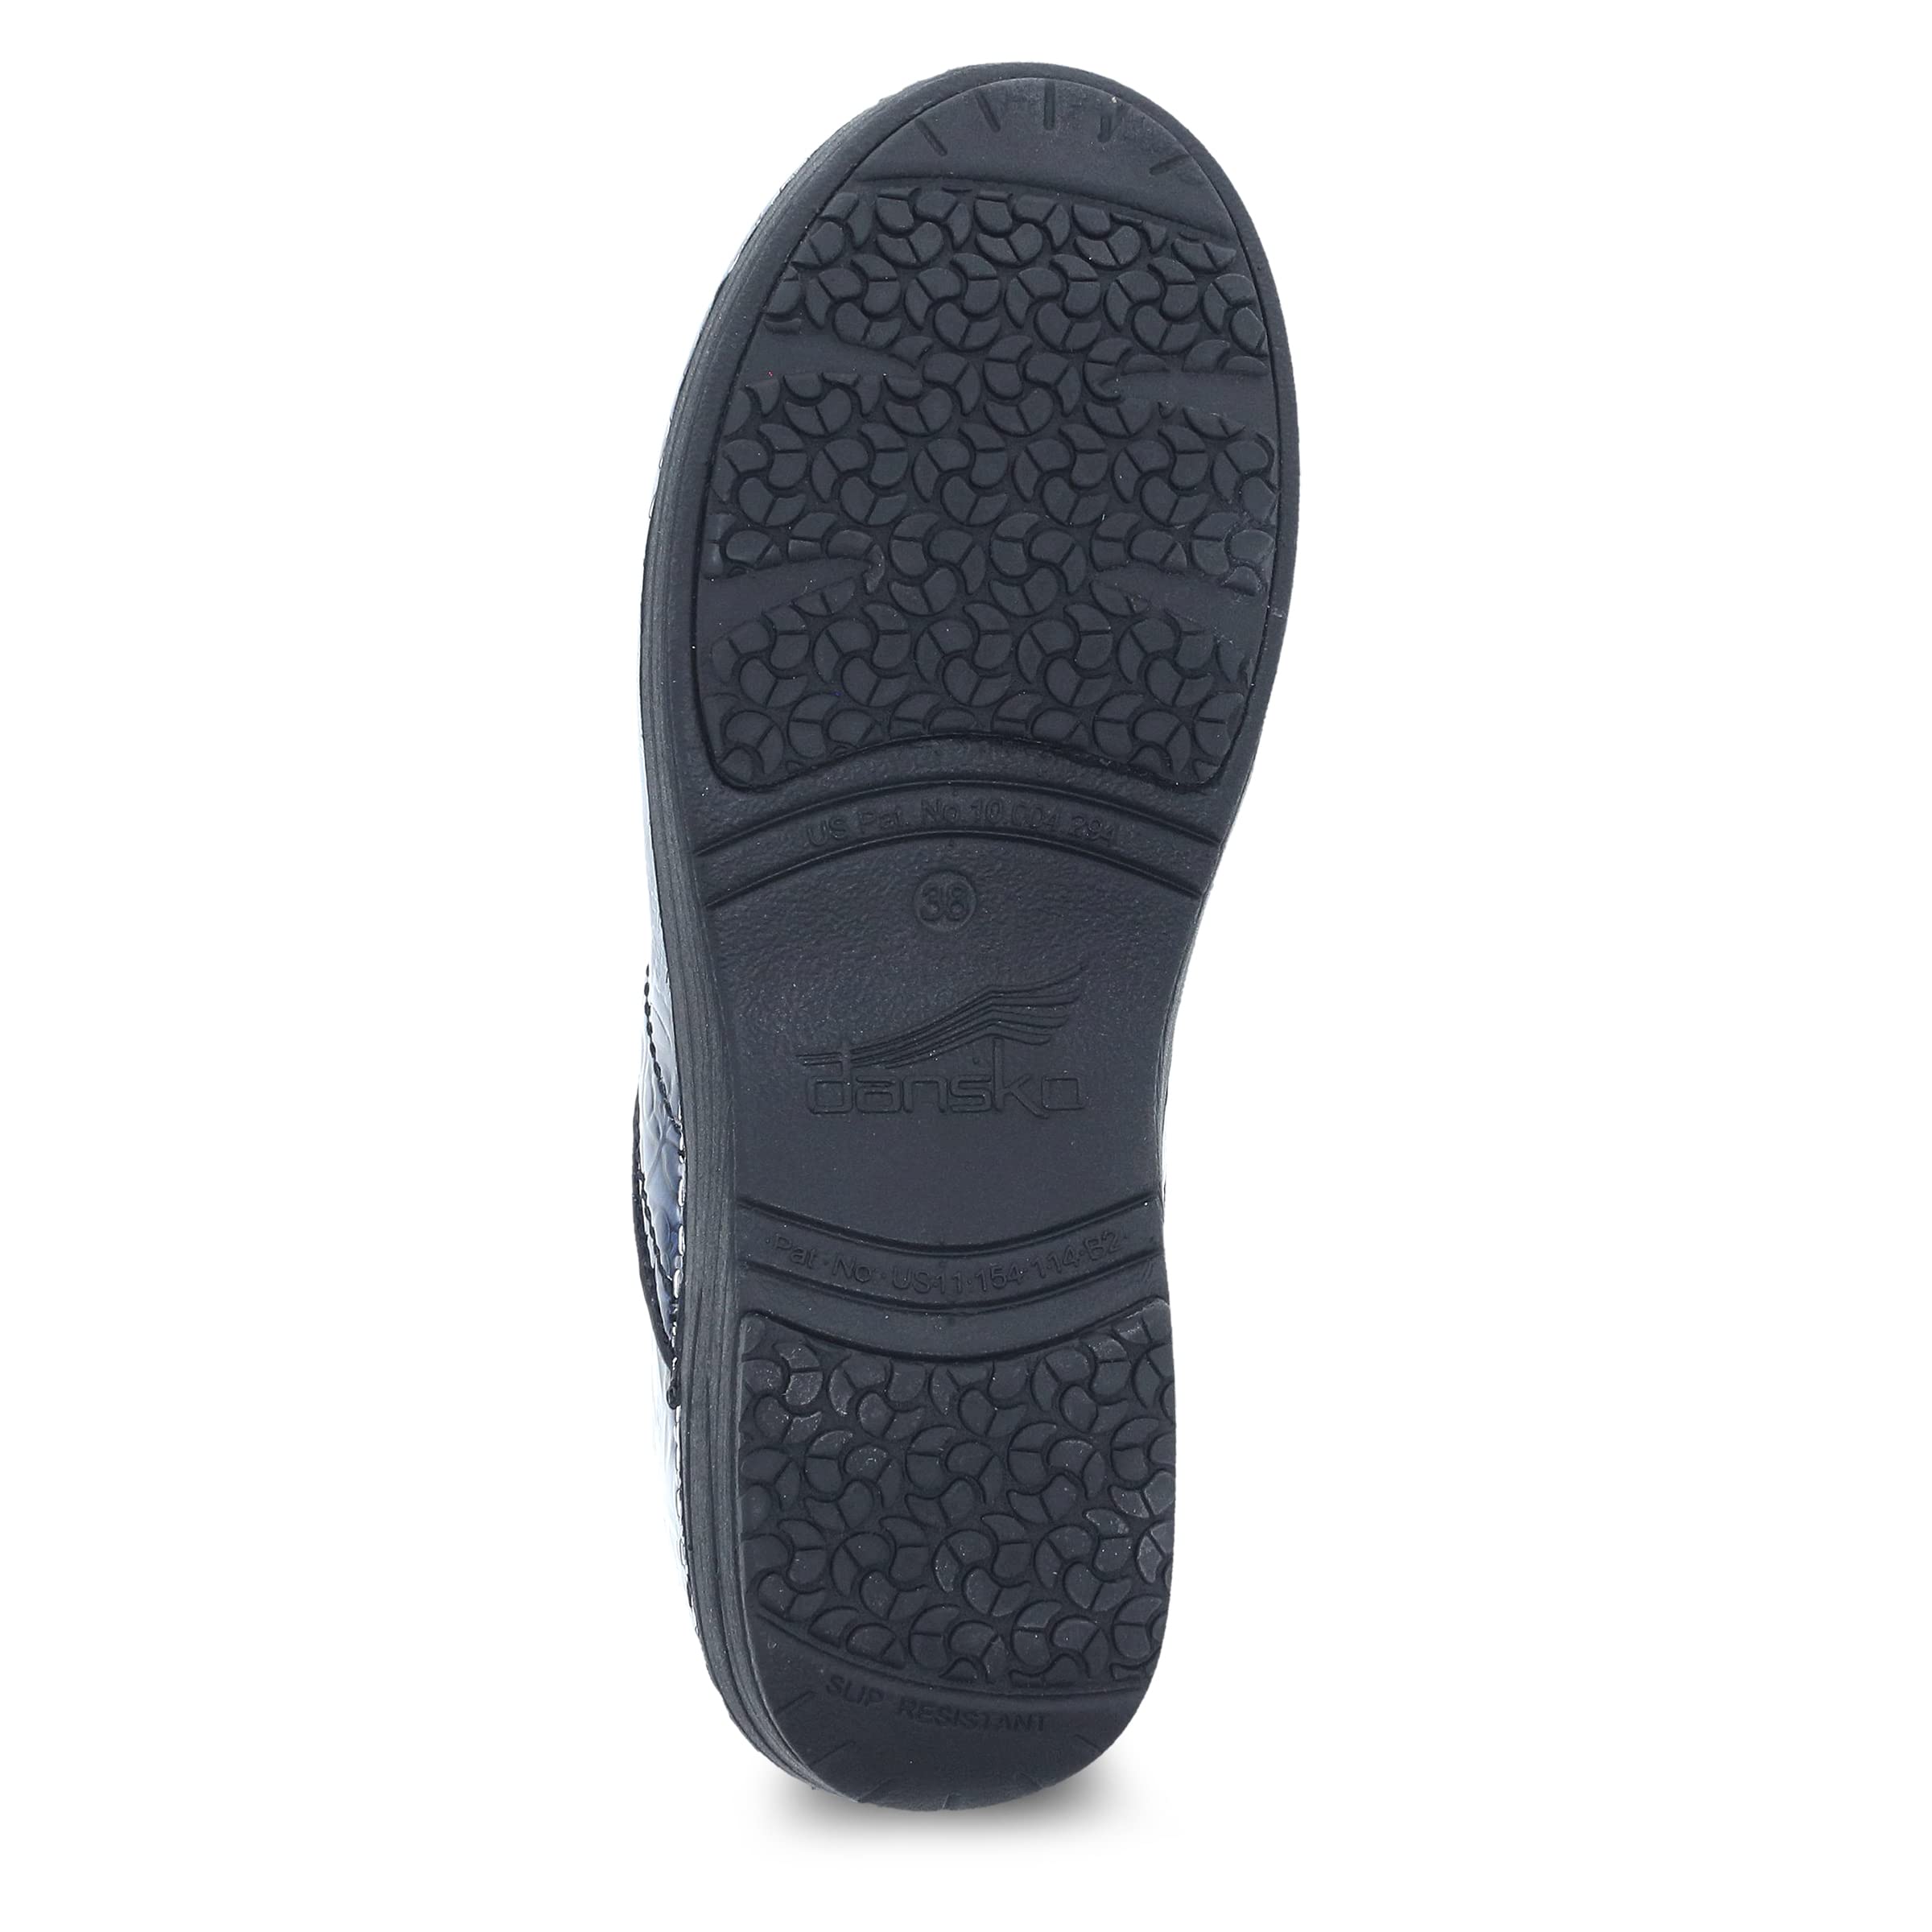 Dansko XP 2.0 Clogs for Women - Lightweight Slip Resistant Footwear for Comfort and Support - Ideal for Long Standing Professionals - Nursing, Veterinarians, Food Service, Healthcare Professionals